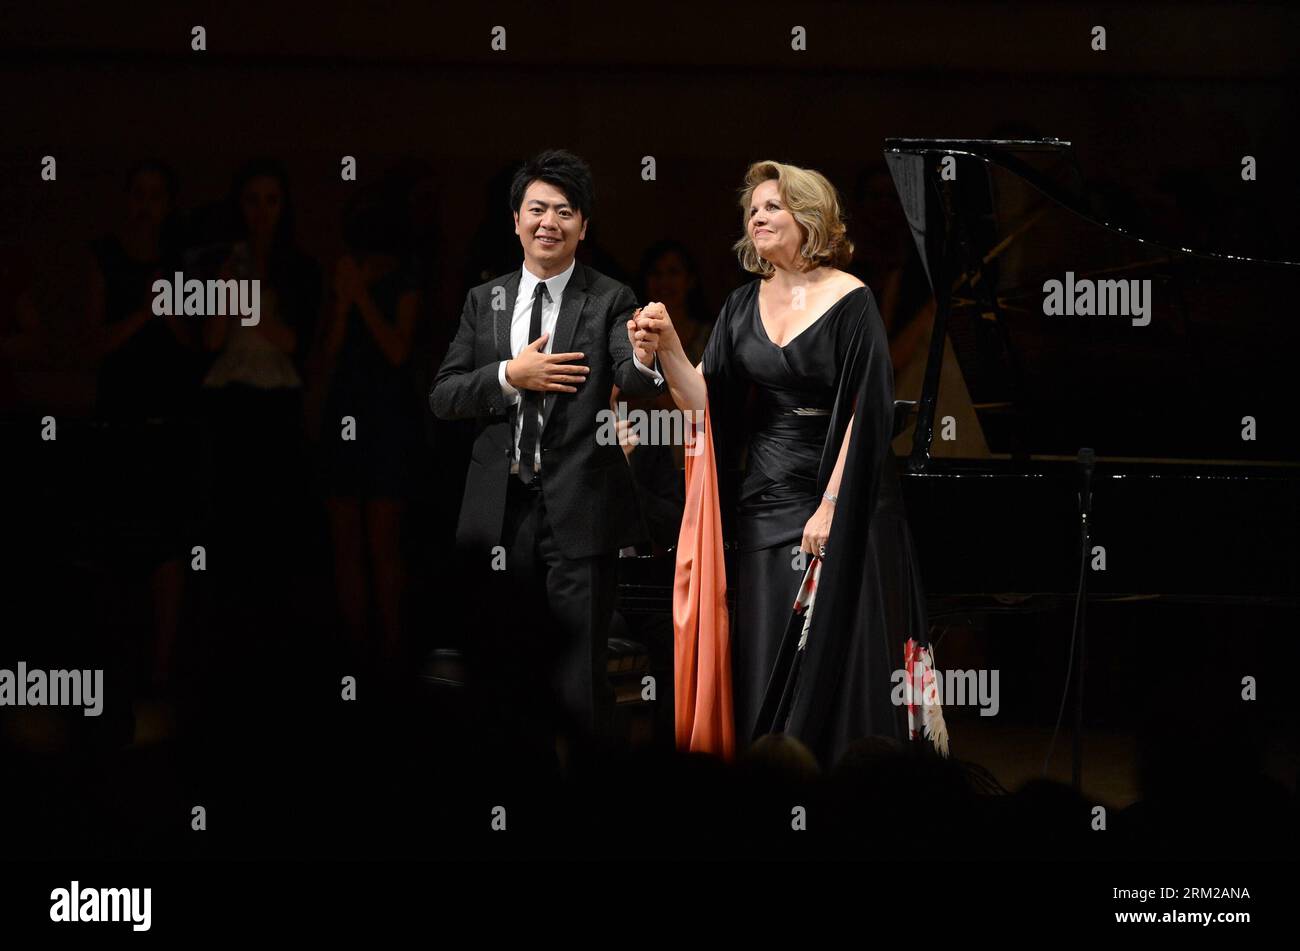 Bildnummer: 59764910  Datum: 03.06.2013  Copyright: imago/Xinhua (130604) -- NEW YORK,   2013 (Xinhua) -- Chinese pianist Lang Lang and U.S. soprano Renee Fleming pose on the stage of Carnegie Hall in New York, the United States, on June 3, 2013. Lang Lang held a charity concert here on Monday with U.S. violinist Joshua Bell, U.S. soprano Renee Fleming and Grammy award-winning artist John Legend. All the income of the performance will donate to Lang Lang International Music Foundation to finance the children s music education across the world. (Xinhua/Wang Lei) (lr) U.S.-NEW YORK-CHINESE PIANI Stock Photo